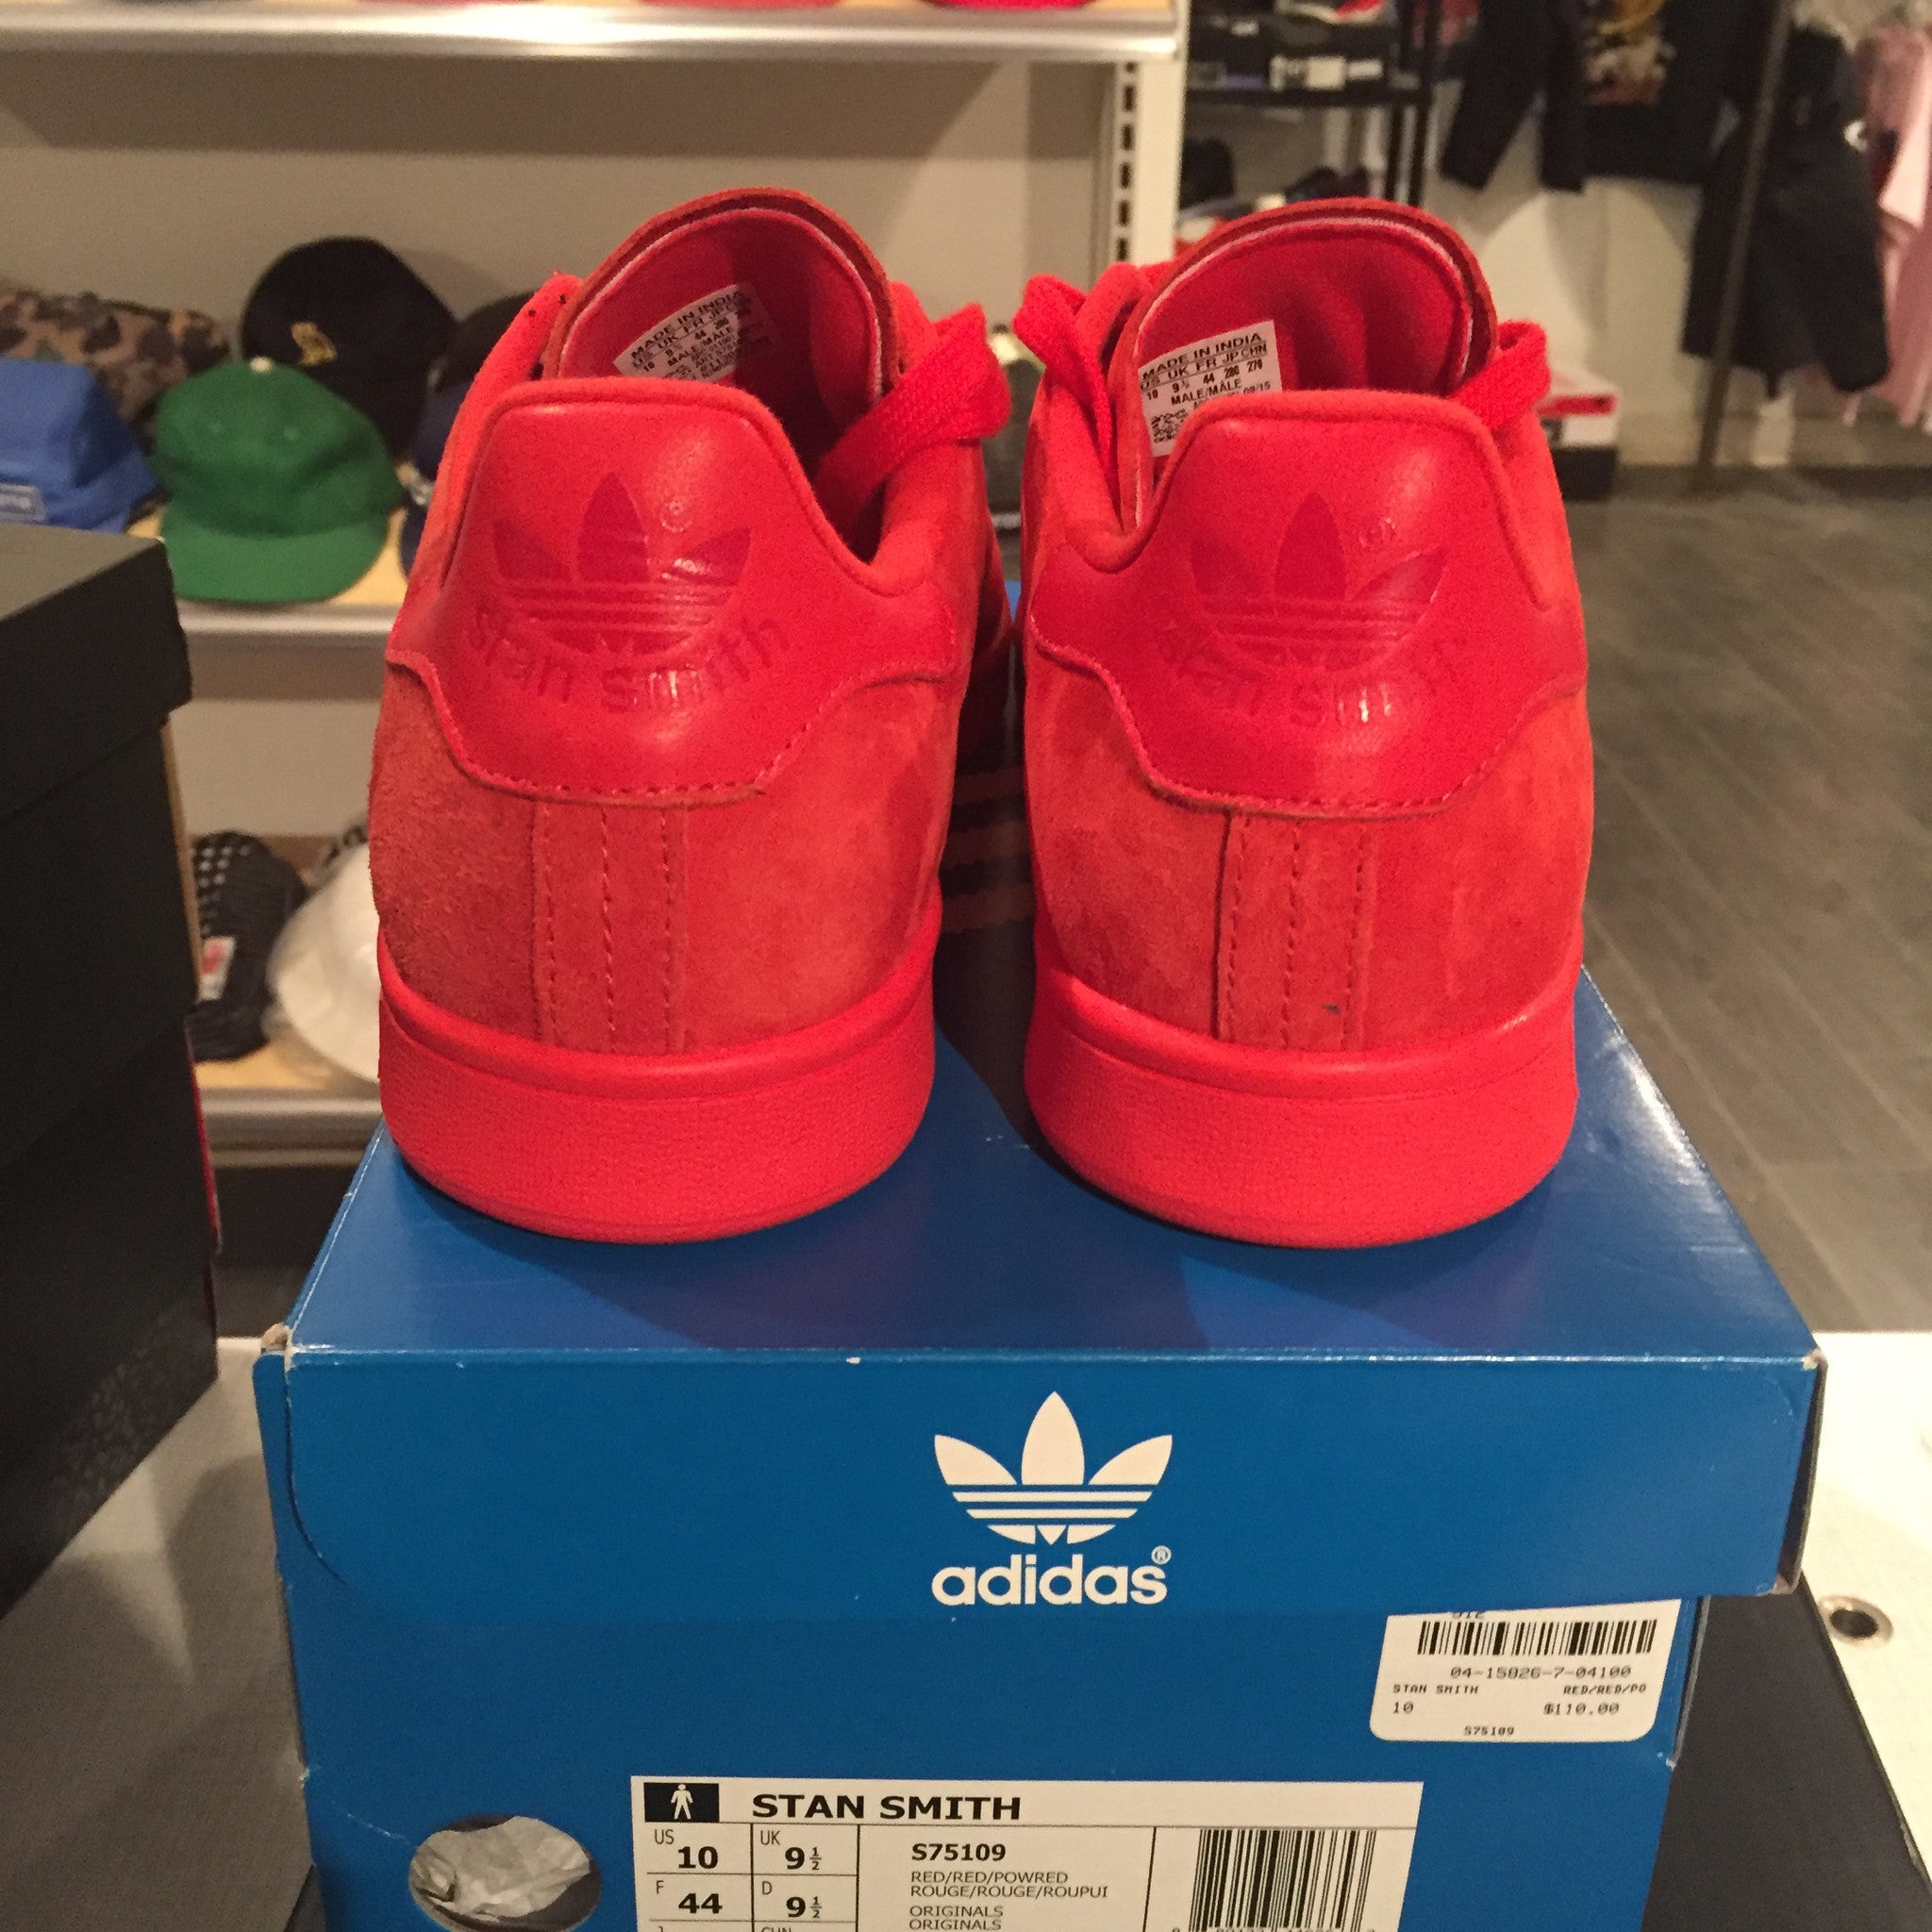 adidas stan smith red mono suede